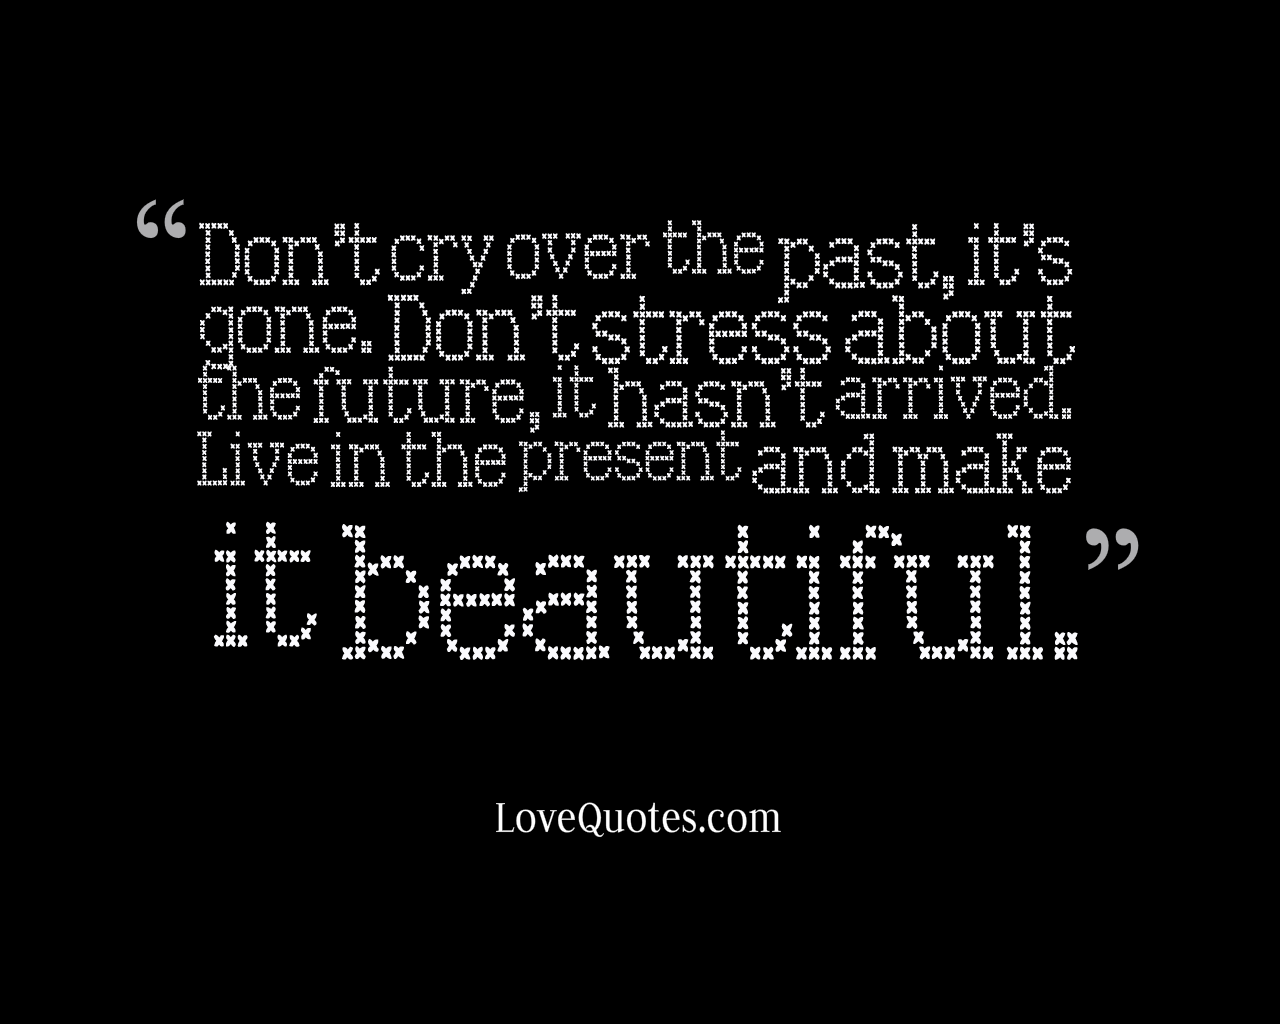 Live In The Present